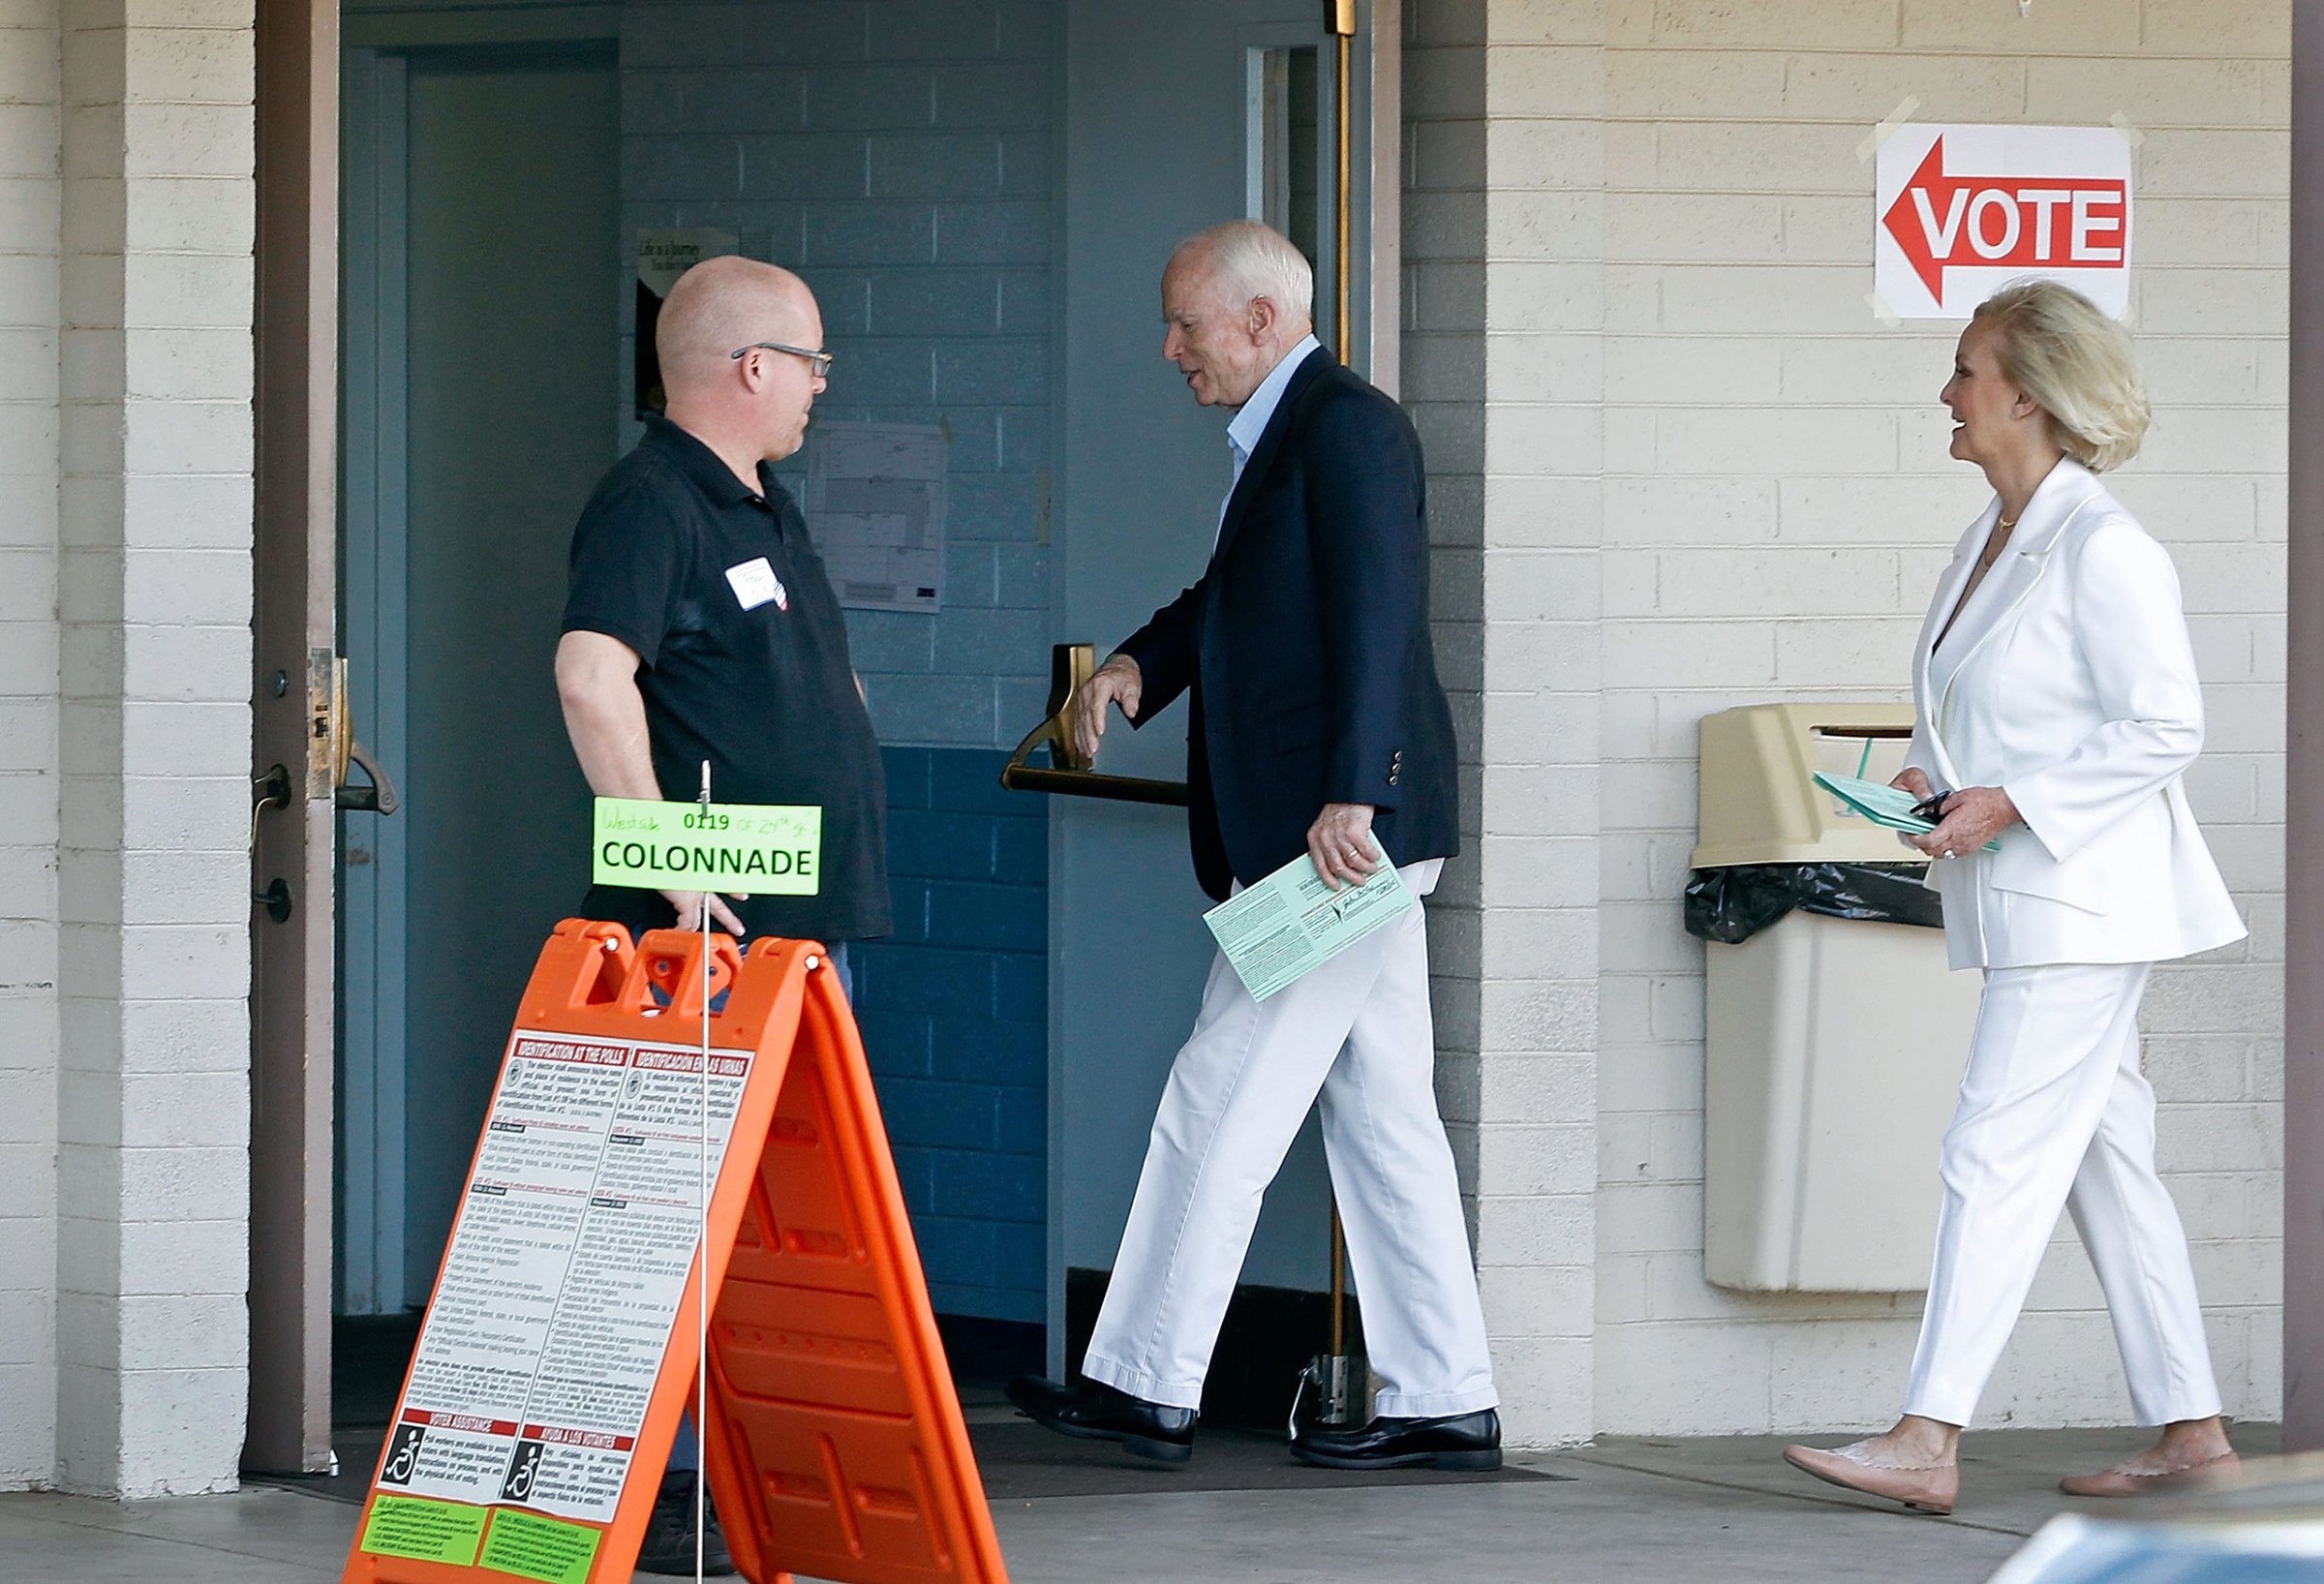 Republican Senator John McCain and his wife Cindy arrive at the Mountain View Christian Church polling place to cast their vote in Phoenix on Nov. 8, 2016.